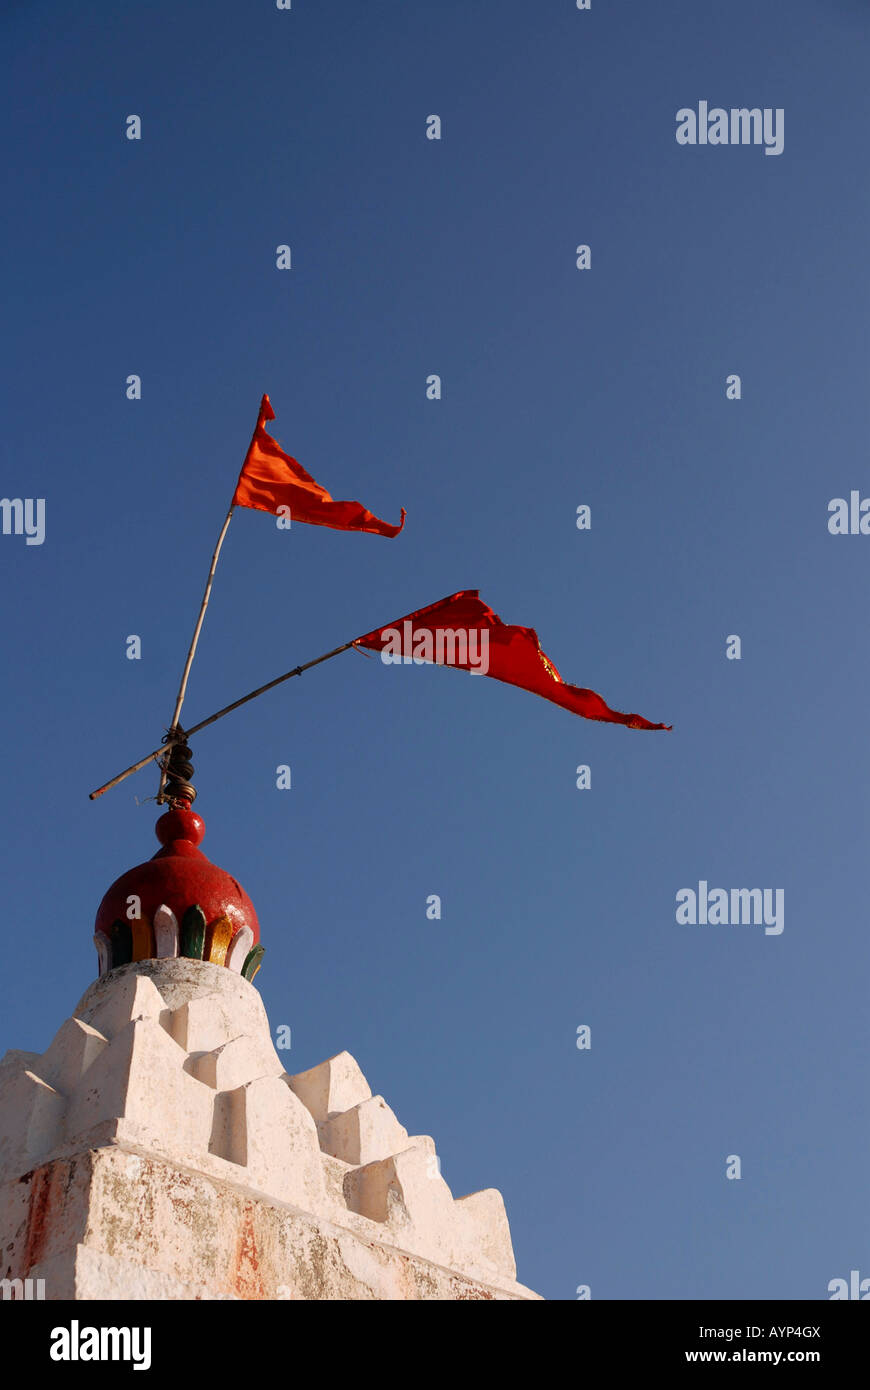 Red flags flying against a blue sky from the top of the whitewashed Hanuman Temple on Anjaneya Hill Stock Photo